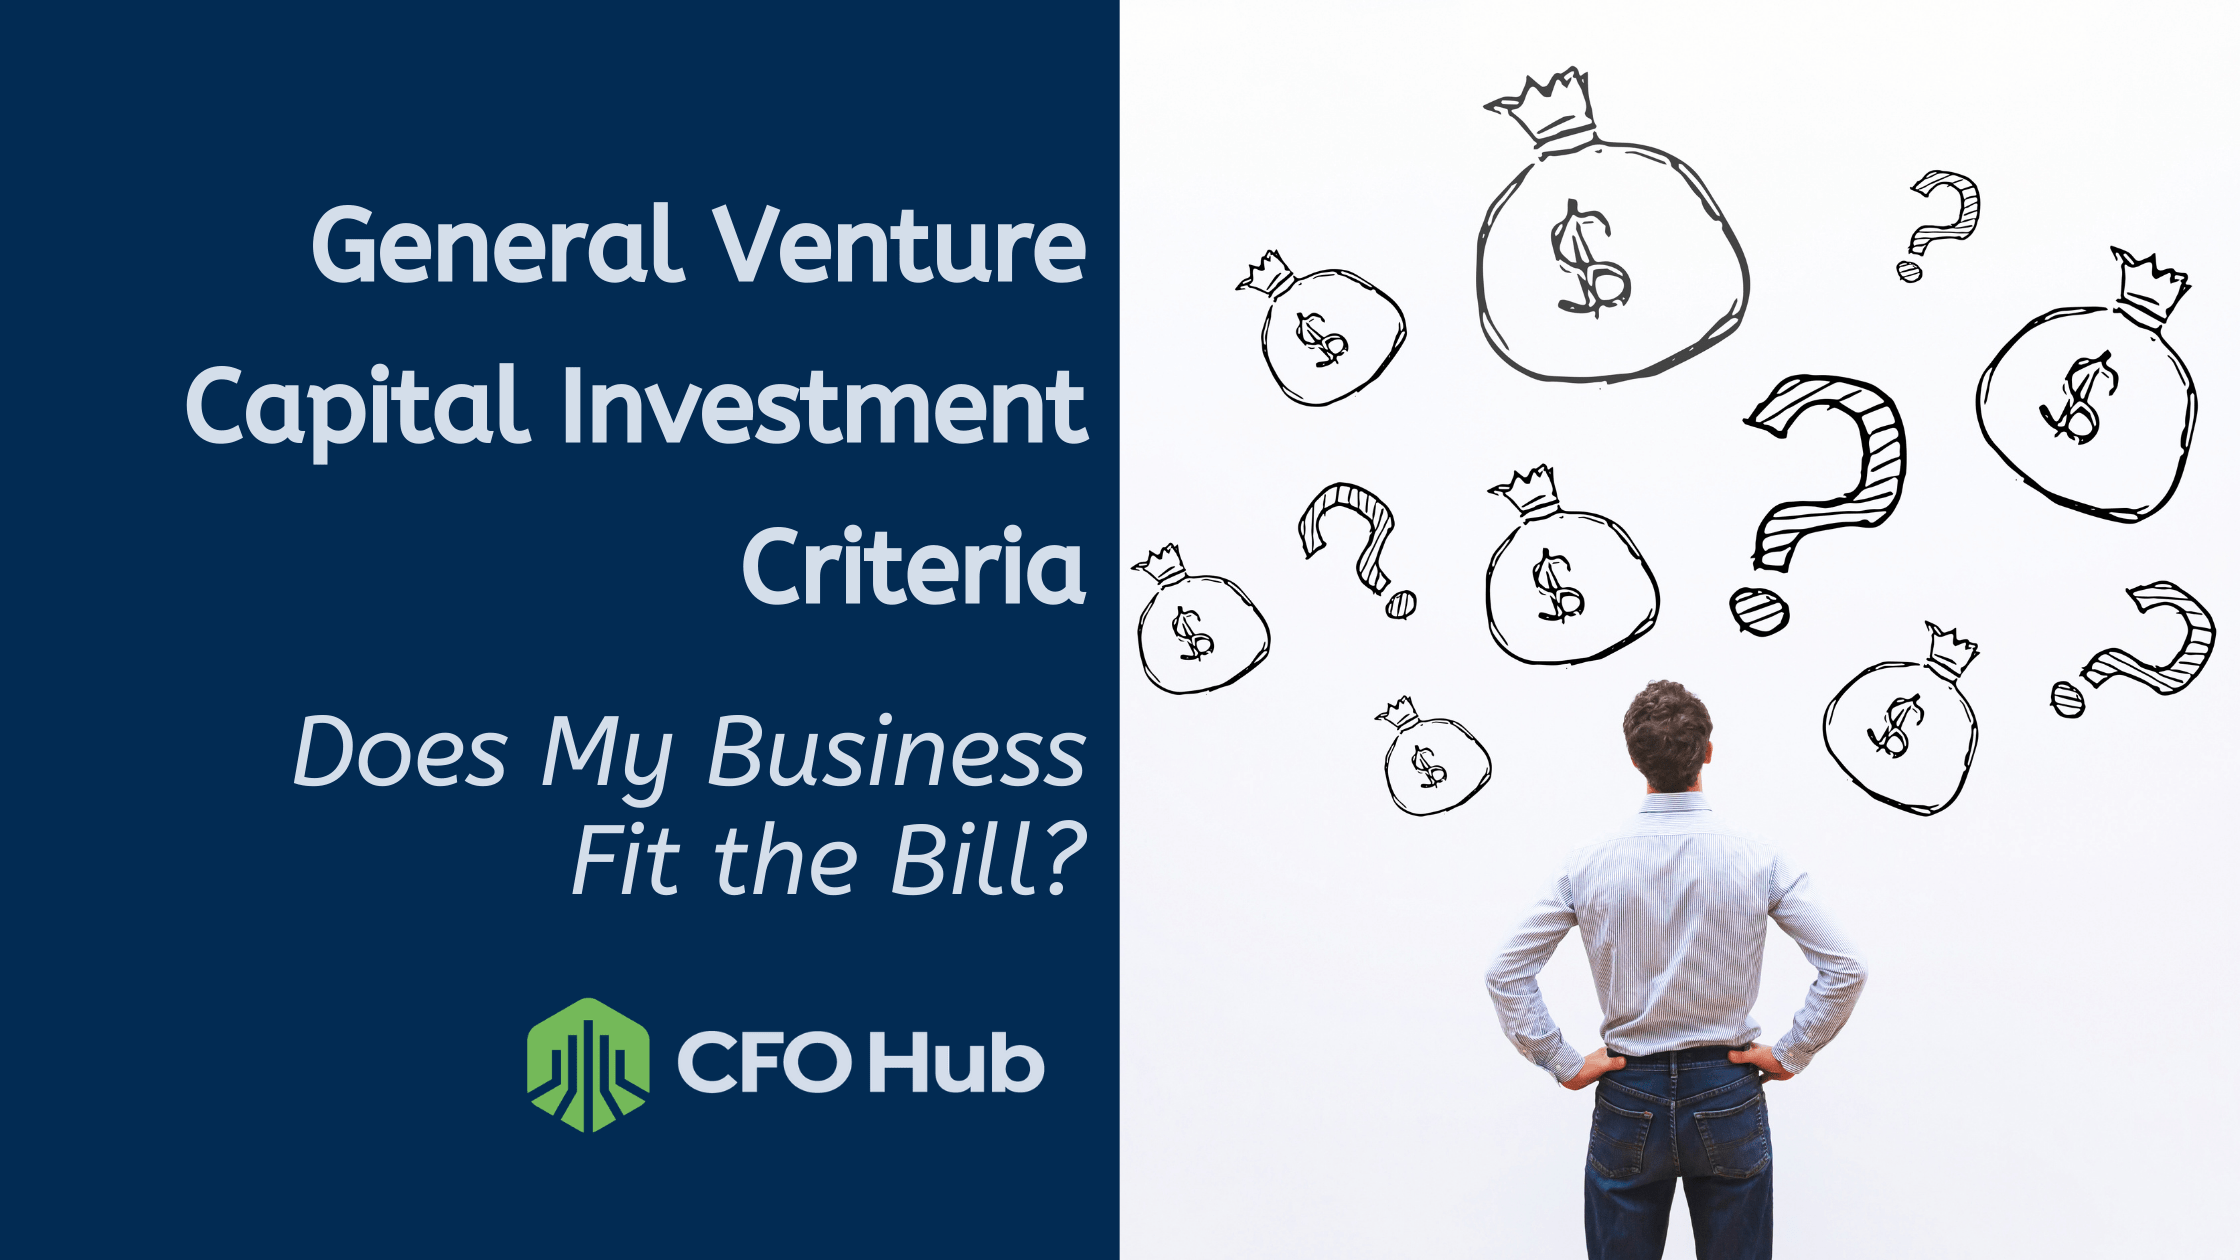 General Venture Capital Investment Criteria. Does My Business Fit the Bill?  - CFO Hub